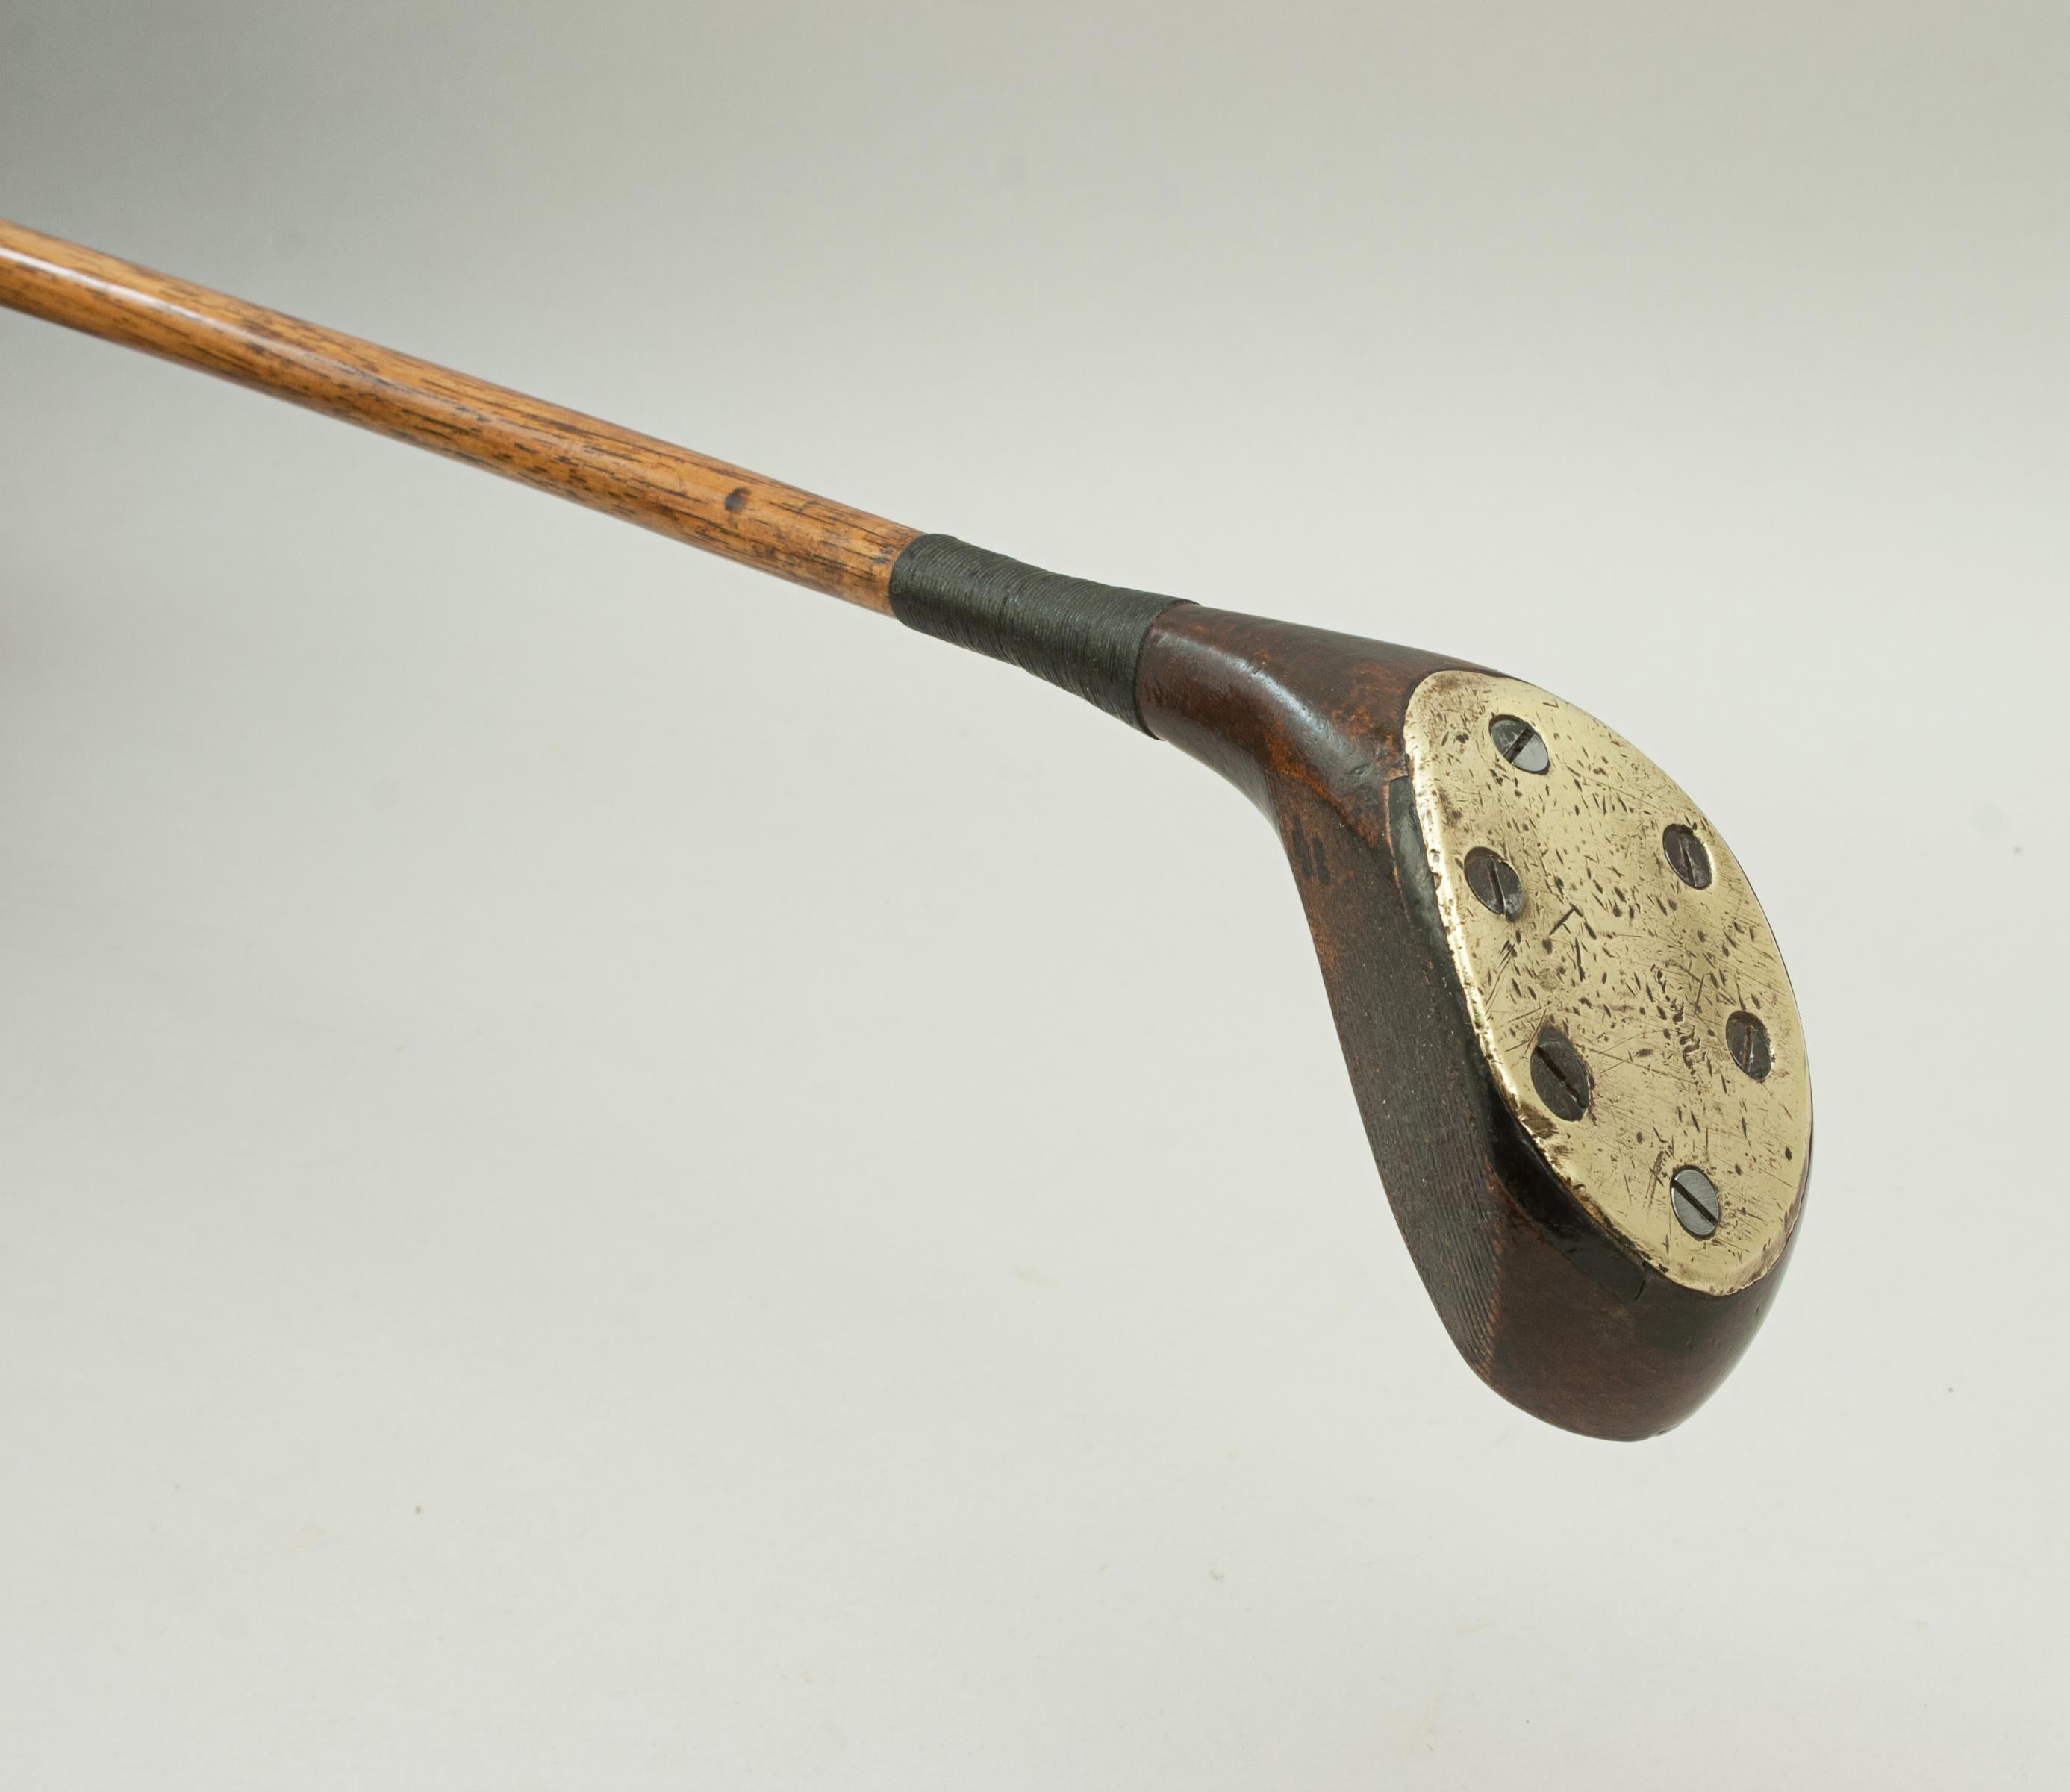 Antique Hickory Shafted Golf Club, Spoon by A. Dimon 1